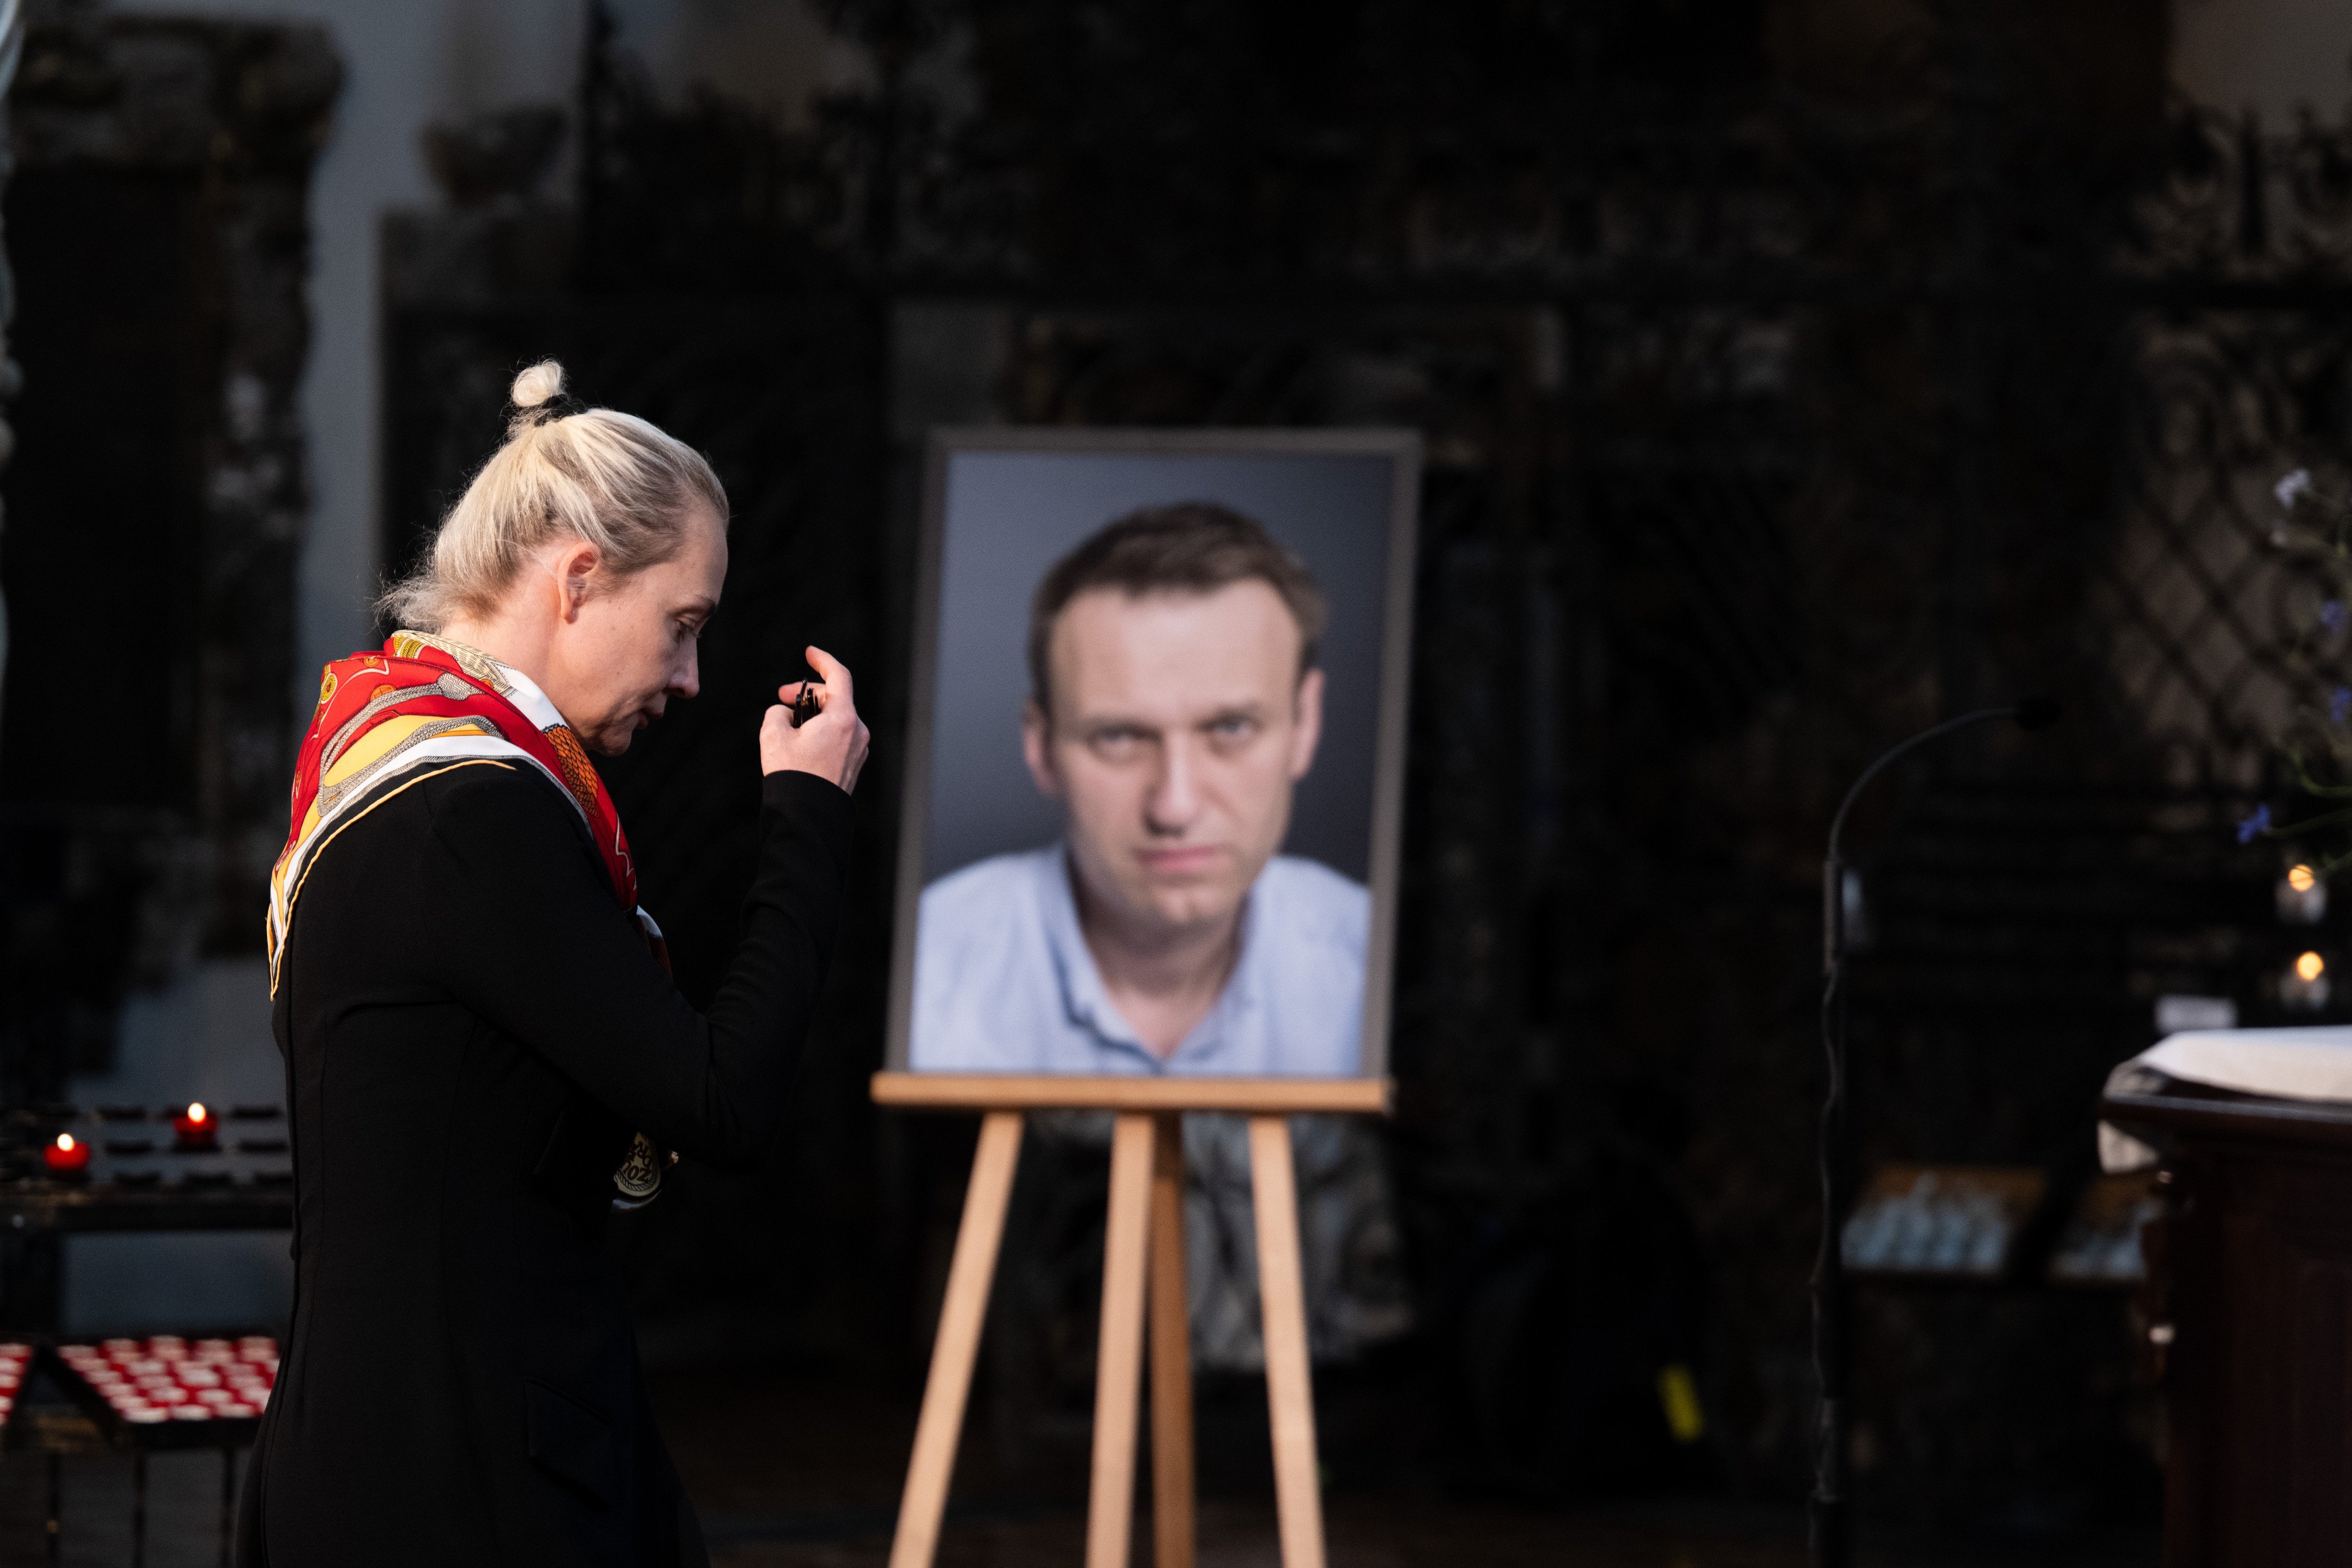 Yulia Navalnaya, widow of late Russian opposition figure Alexei Navalny, attends a memorial service in his honour, on his birthday at the Church of Saint Mary in Berlin, Germany last month. Photo: dpa